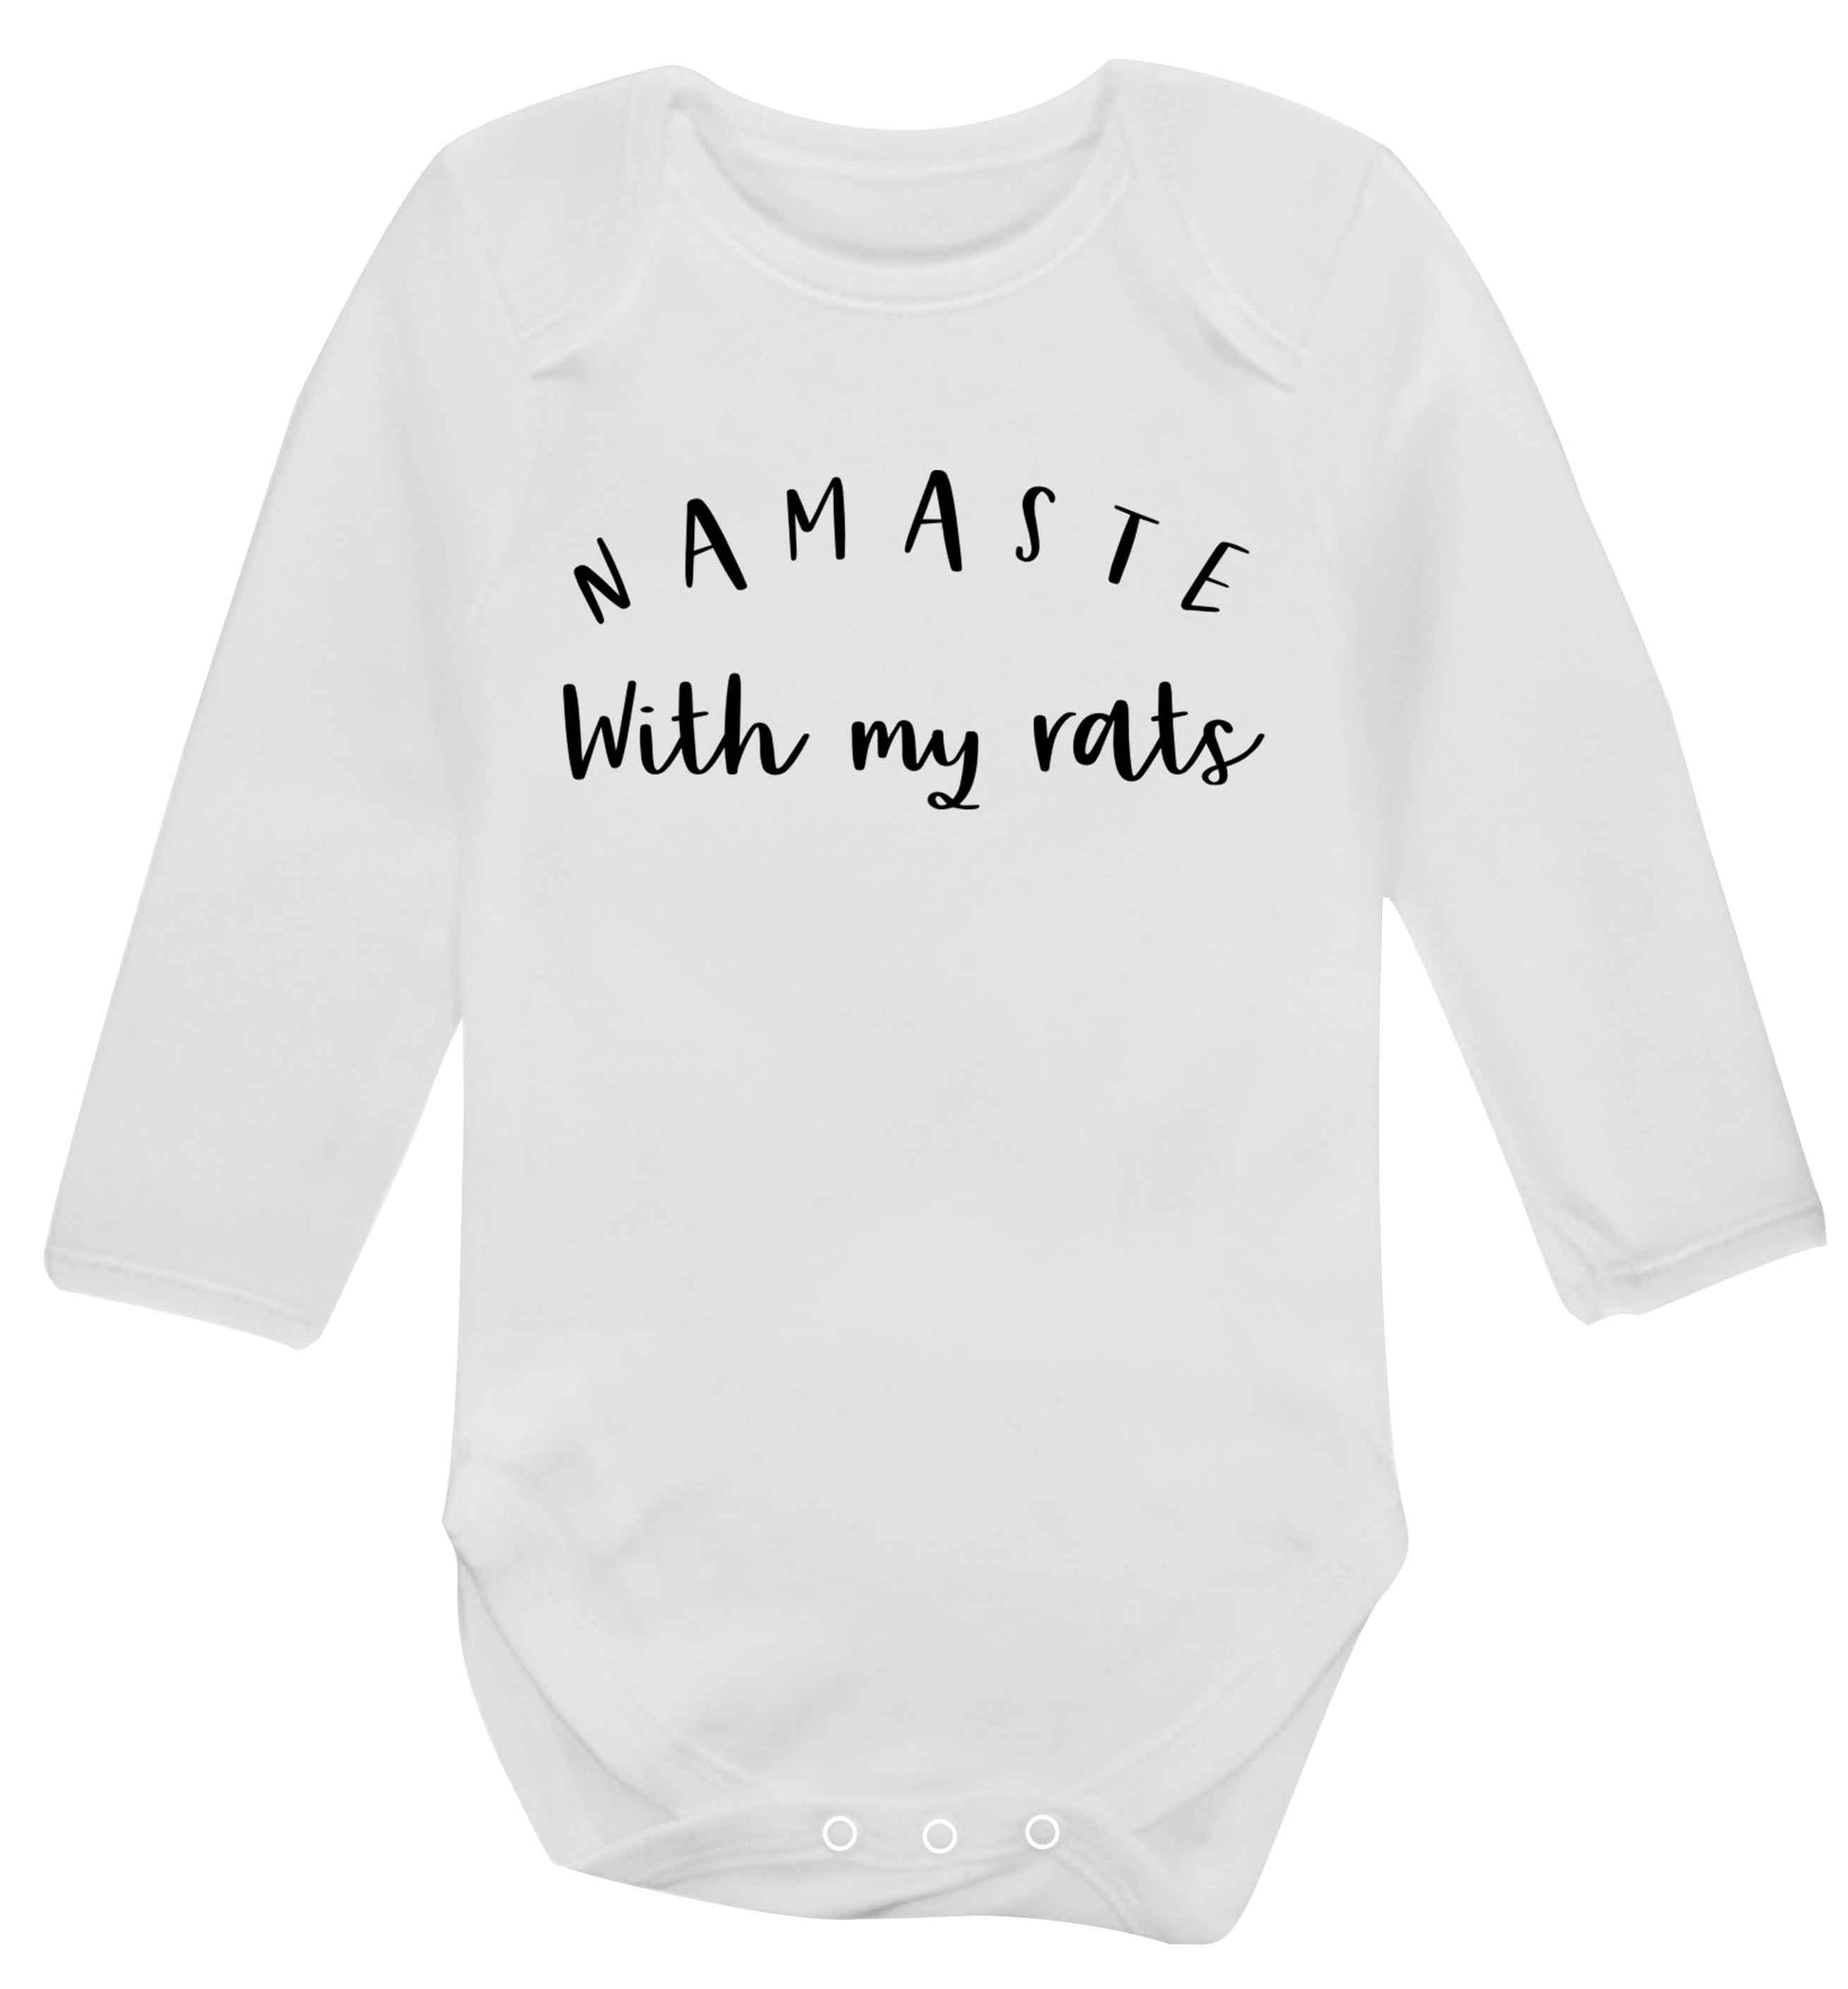 Namaste with my rats Baby Vest long sleeved white 6-12 months